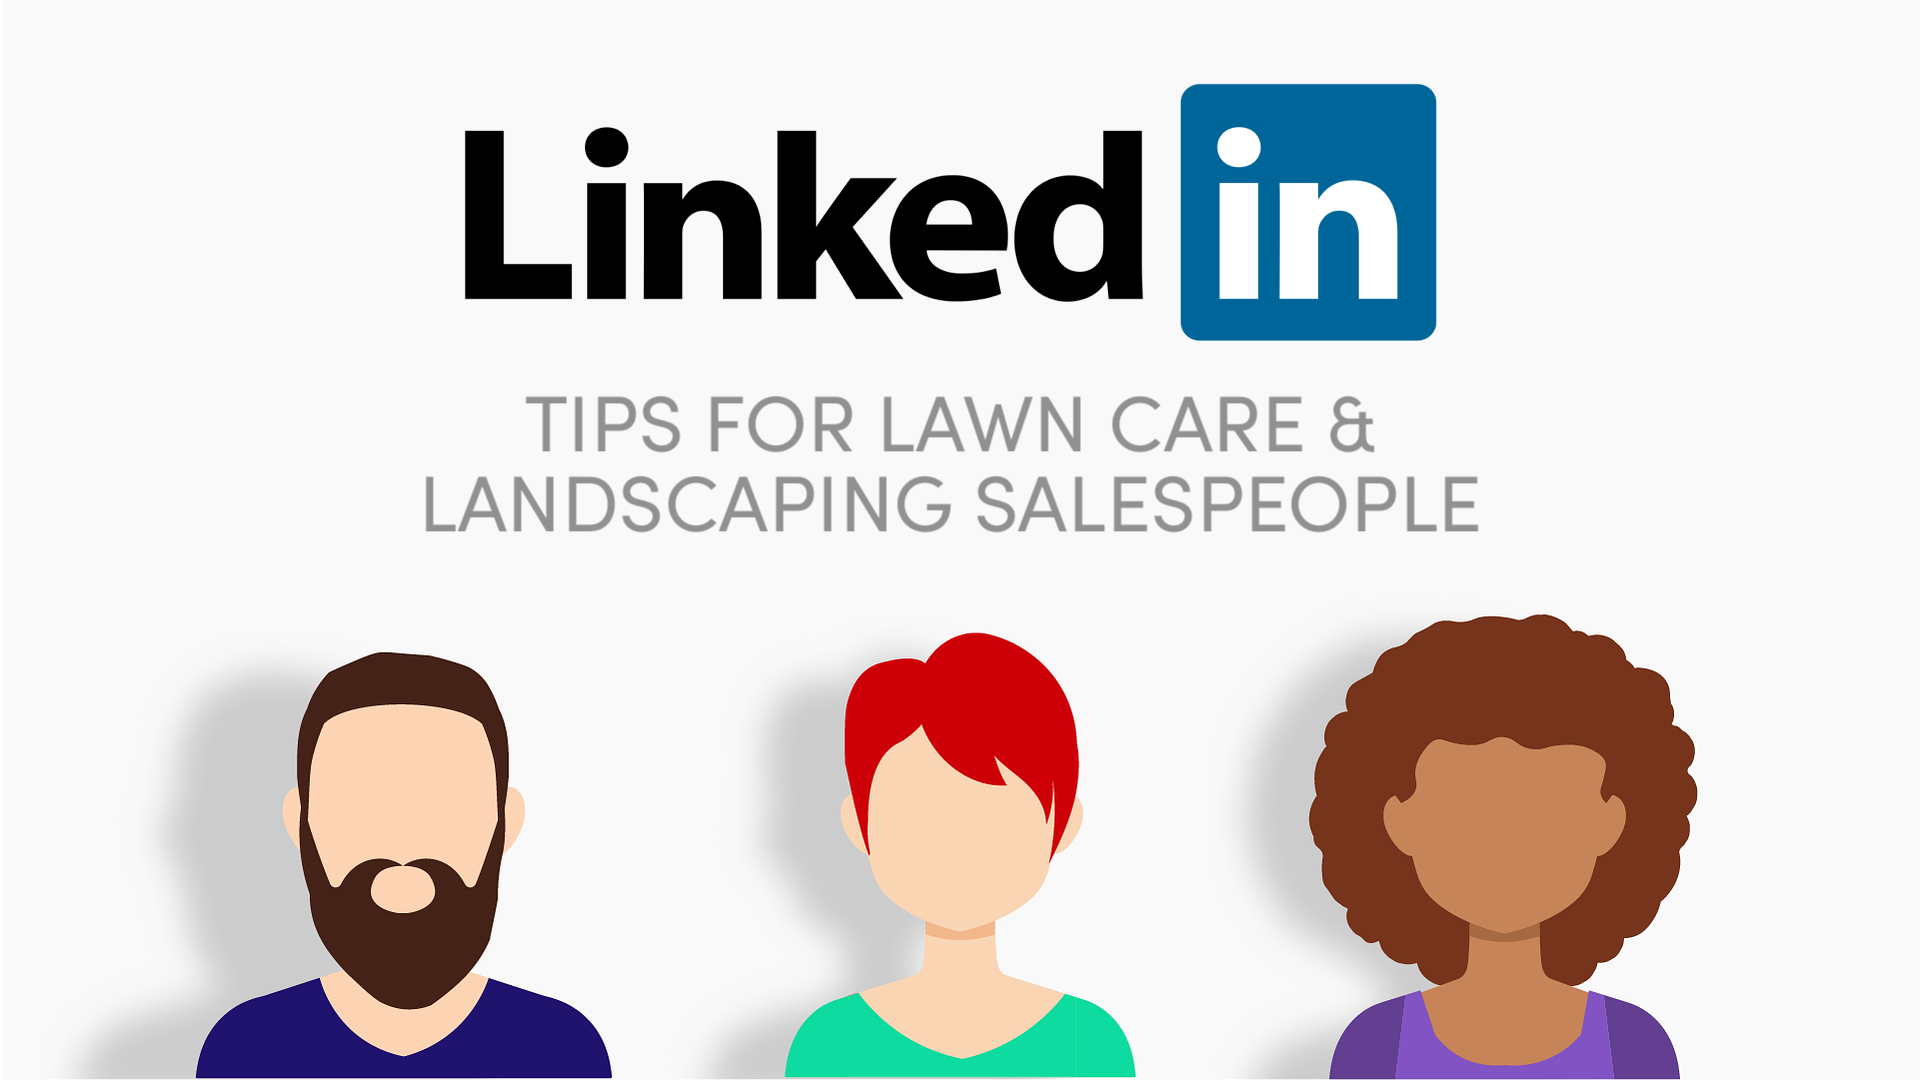 10 Things Landscaping Salespeople Shouldn't (& Should) Do on LinkedIn